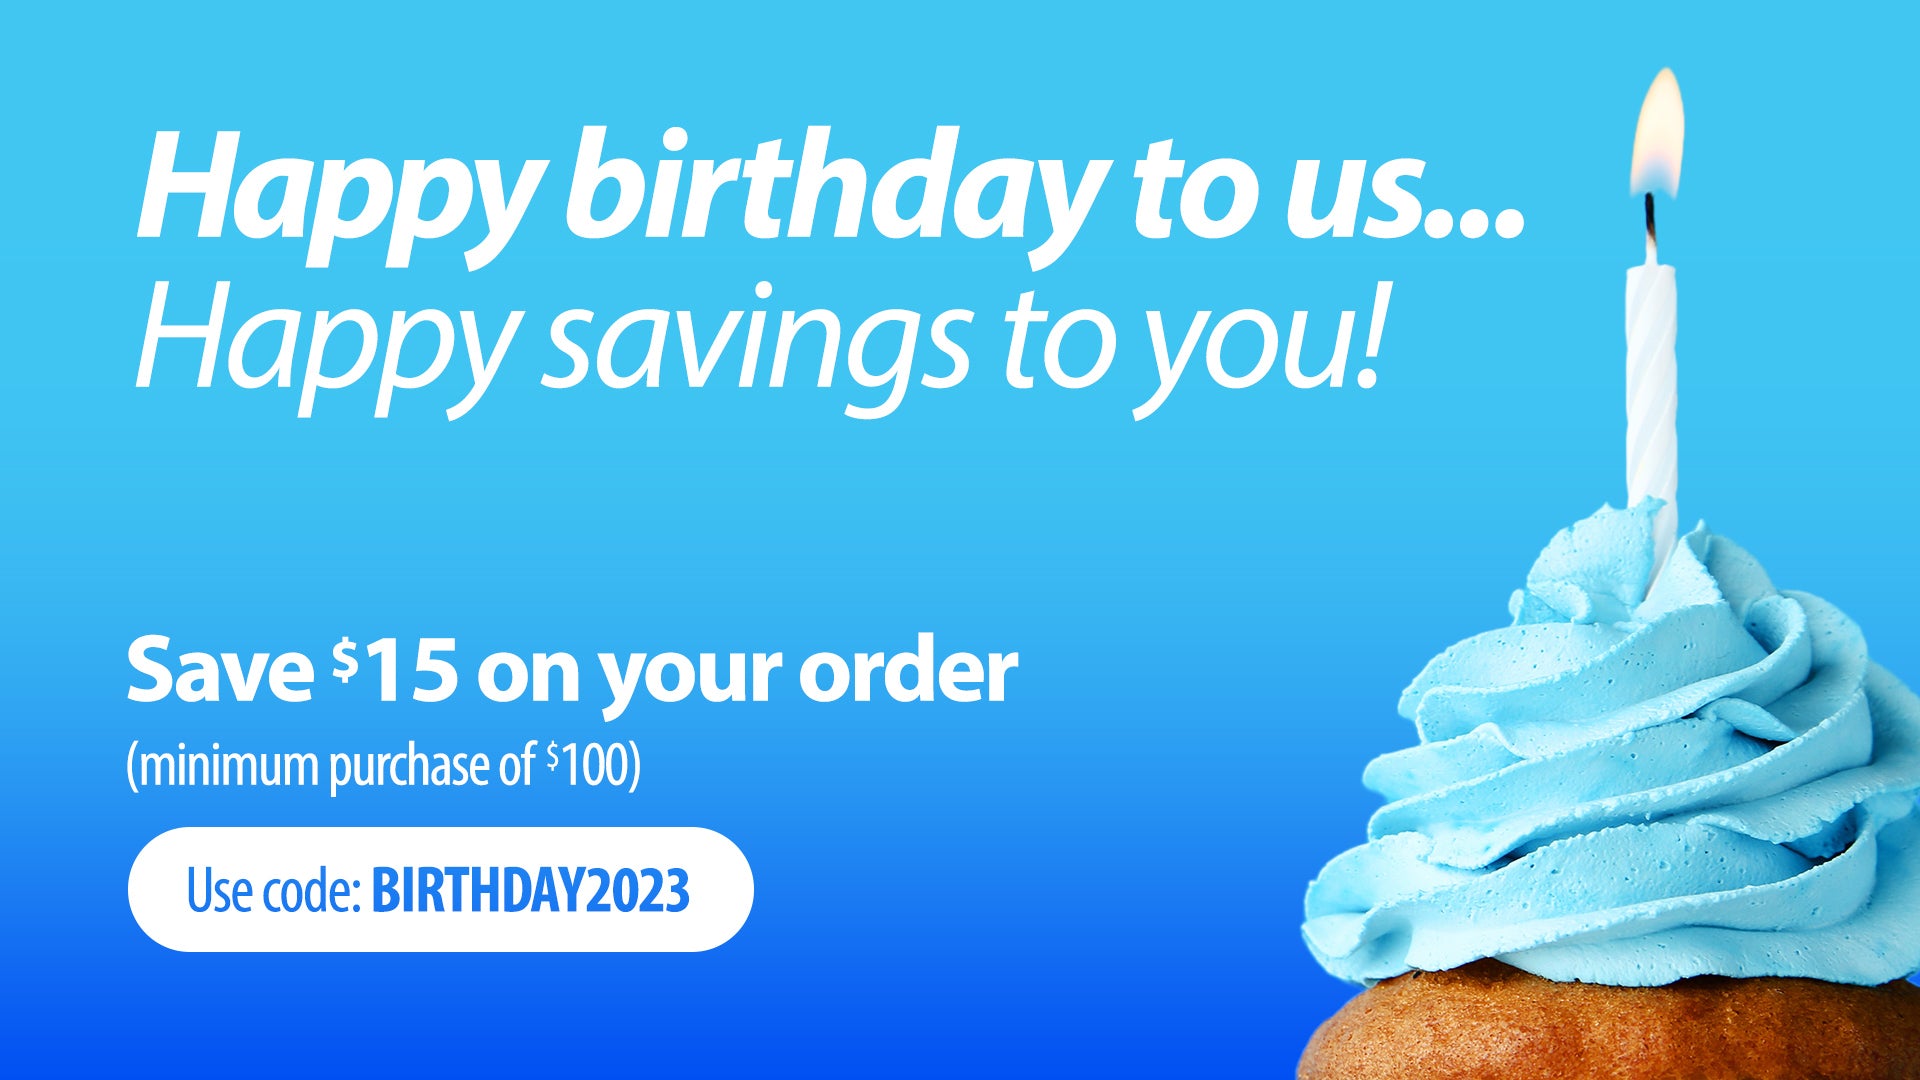 Our biggest coupon of the year... $15 off for Jigsaw’s Birthday!